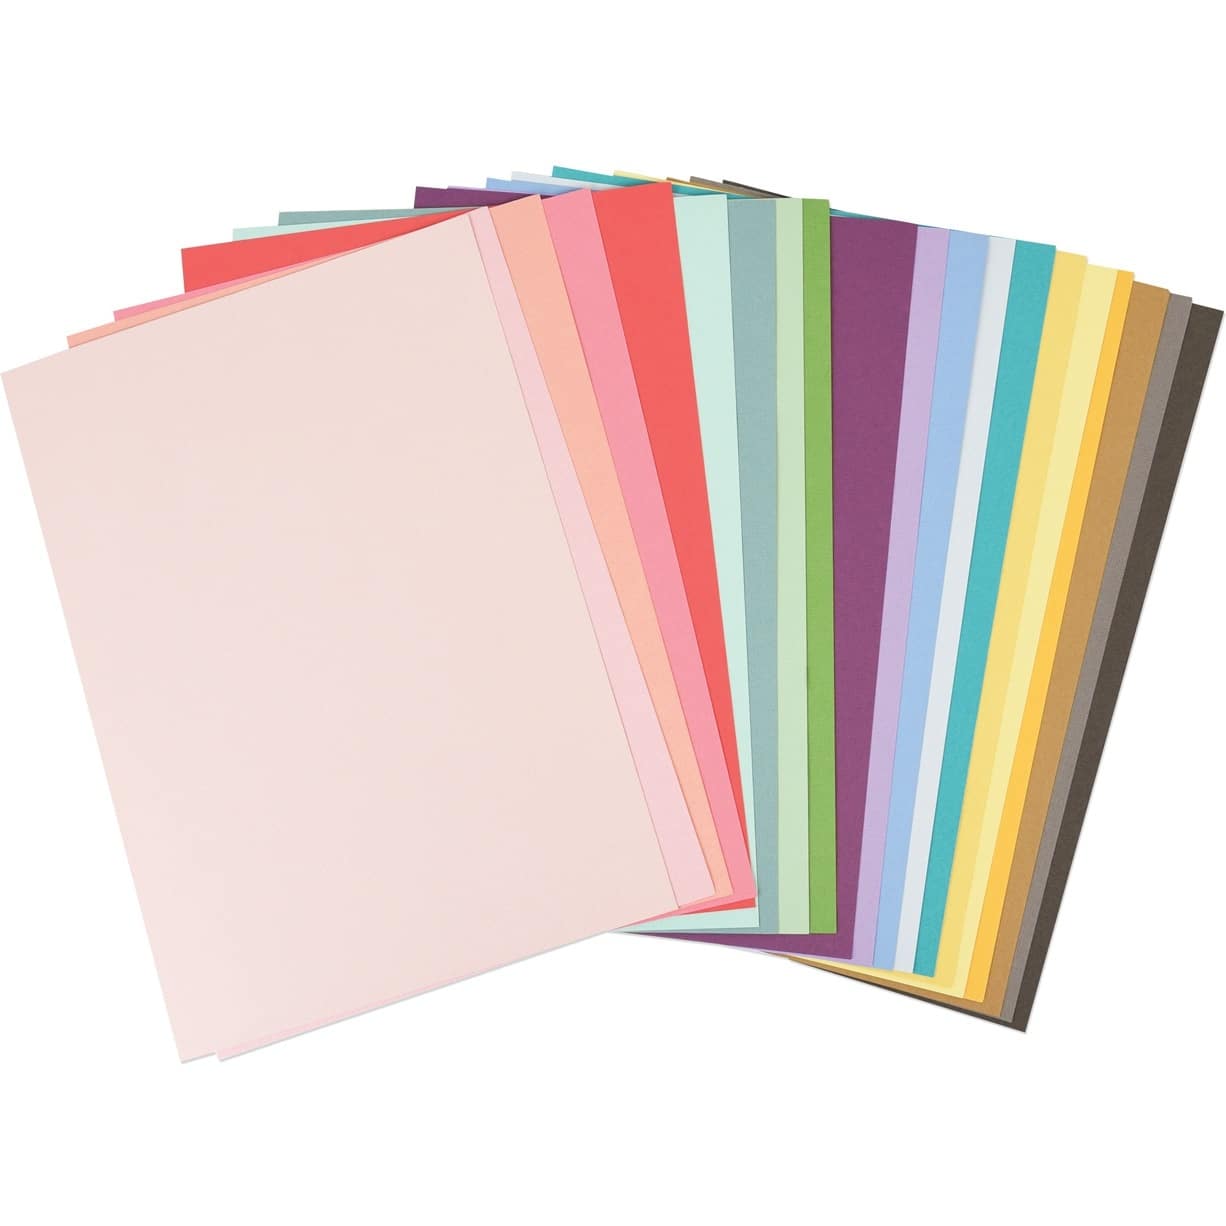 Sizzix&#xAE; Multi-Color Textured Cardstock, 80 Sheets